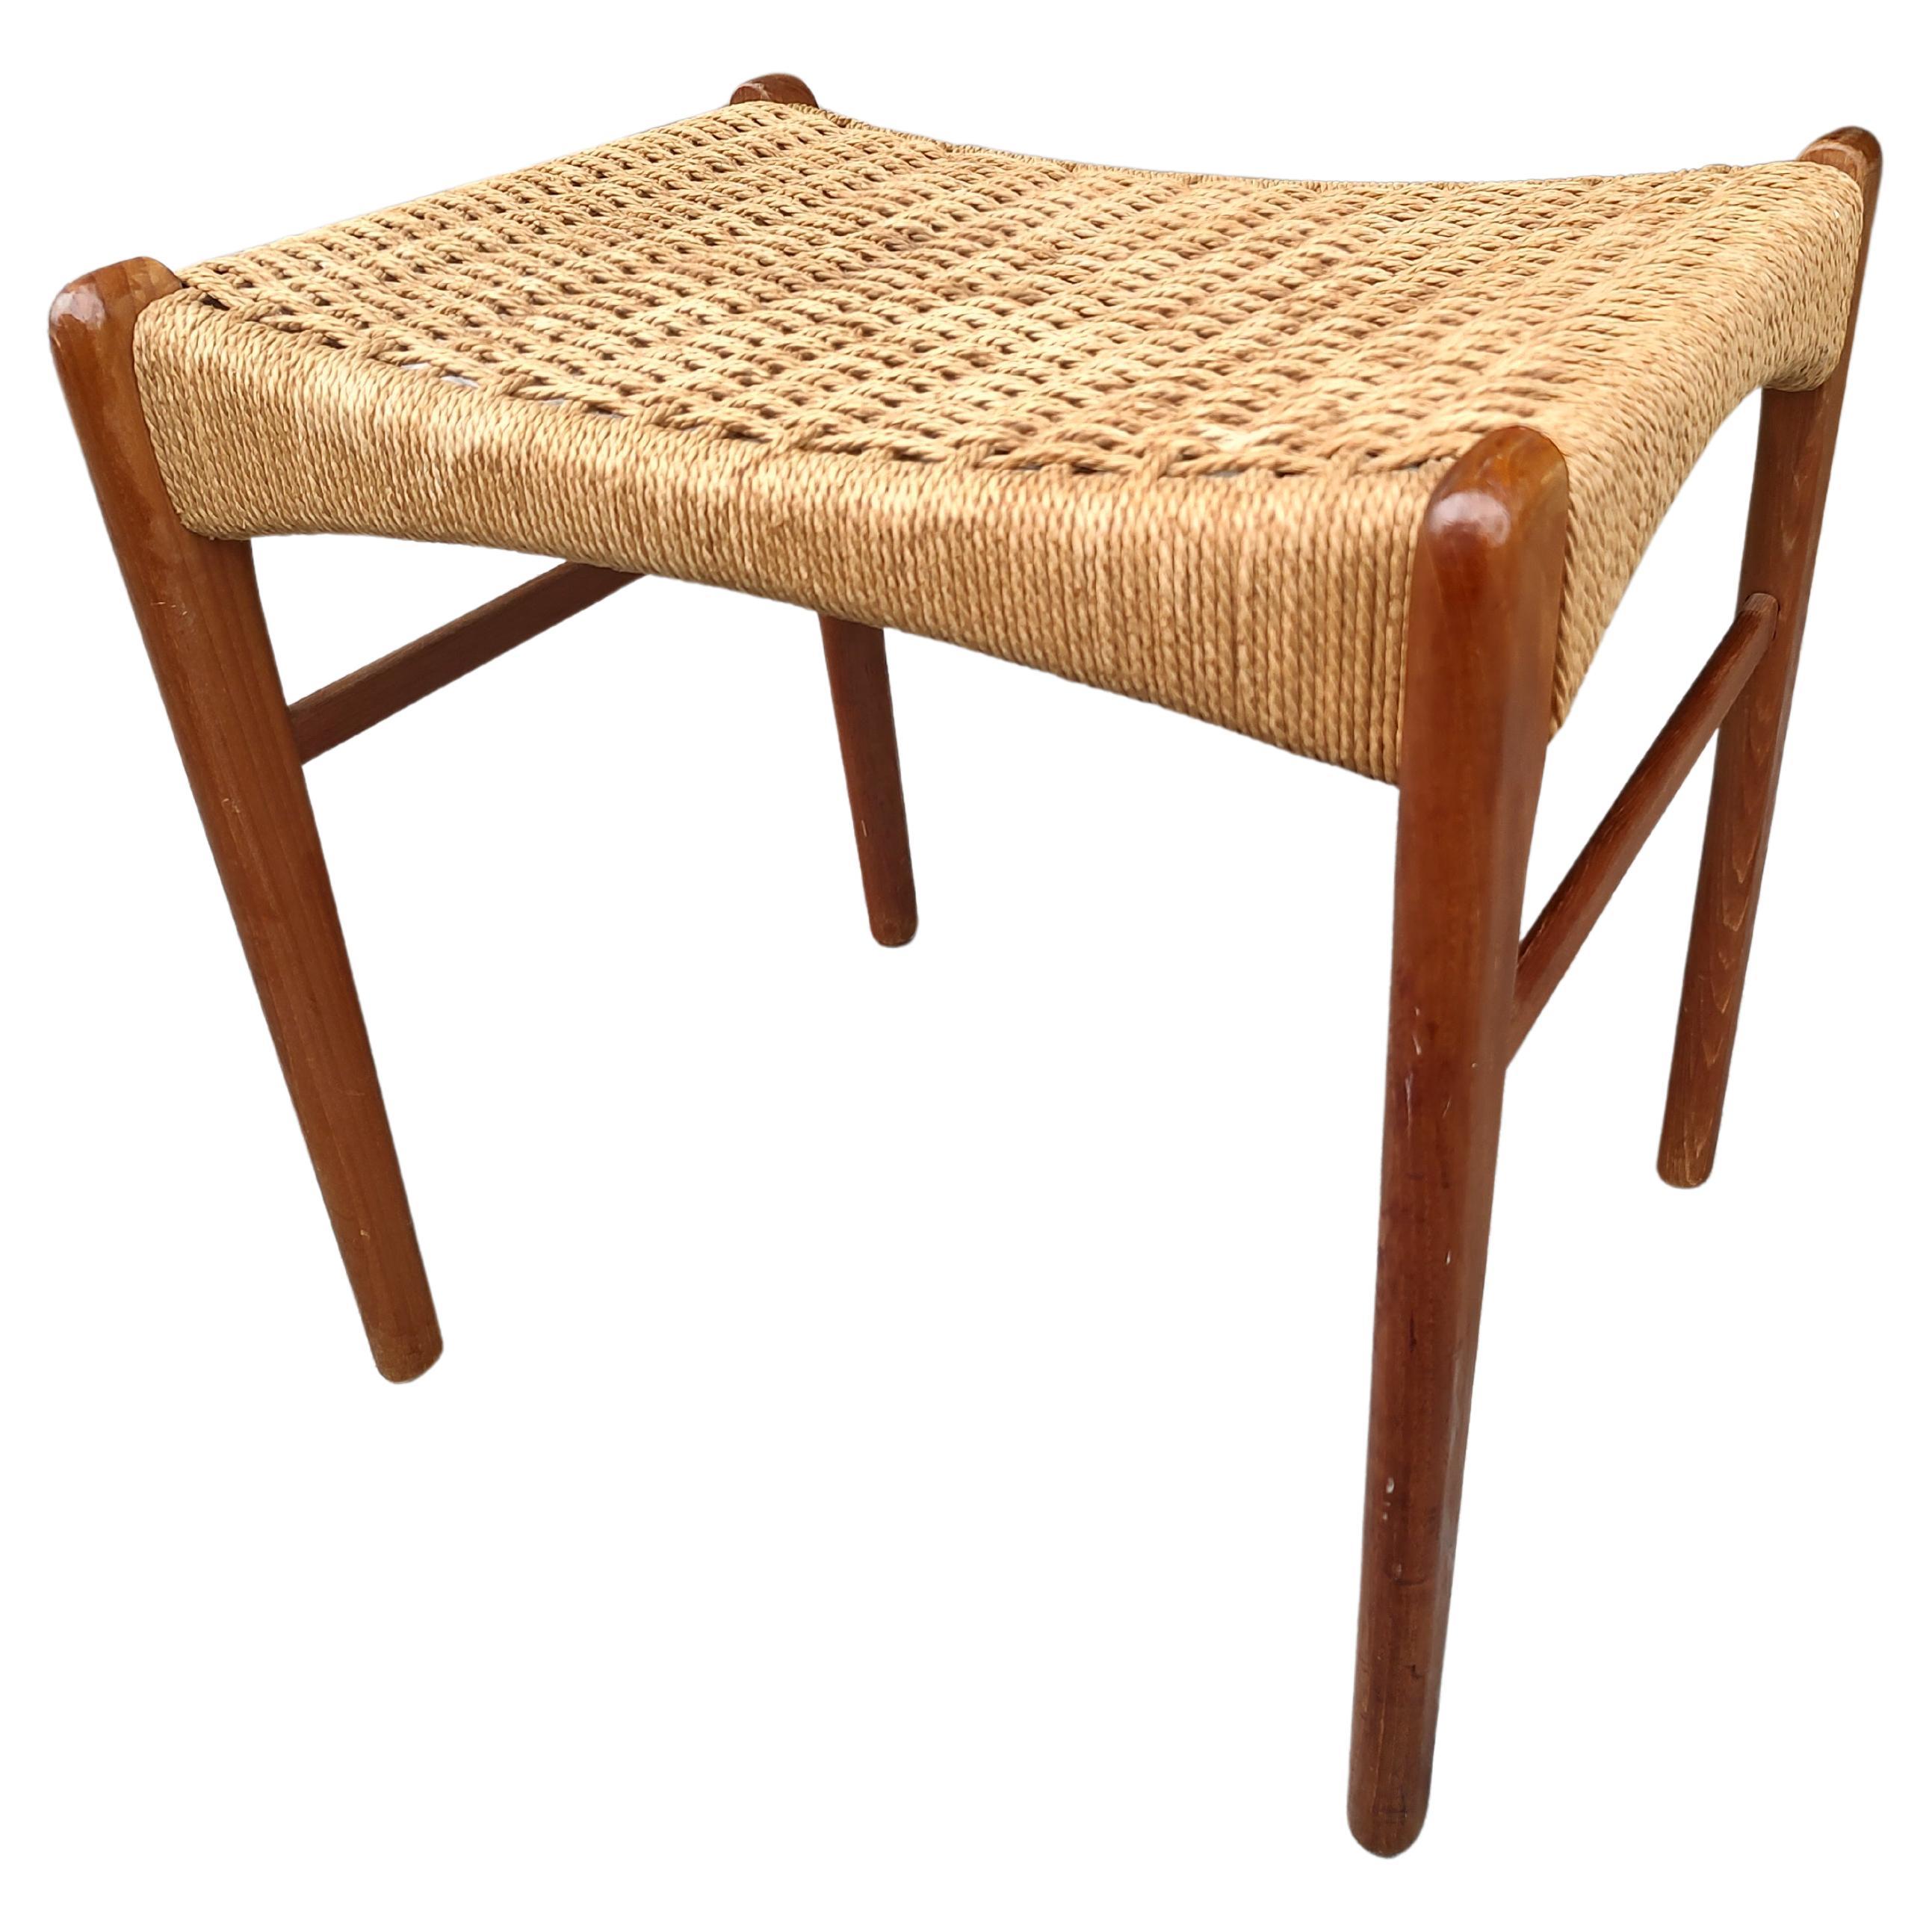 Mid-Century Modern Danish Footstool with Woven Paper Cord Seat, 1960 For Sale